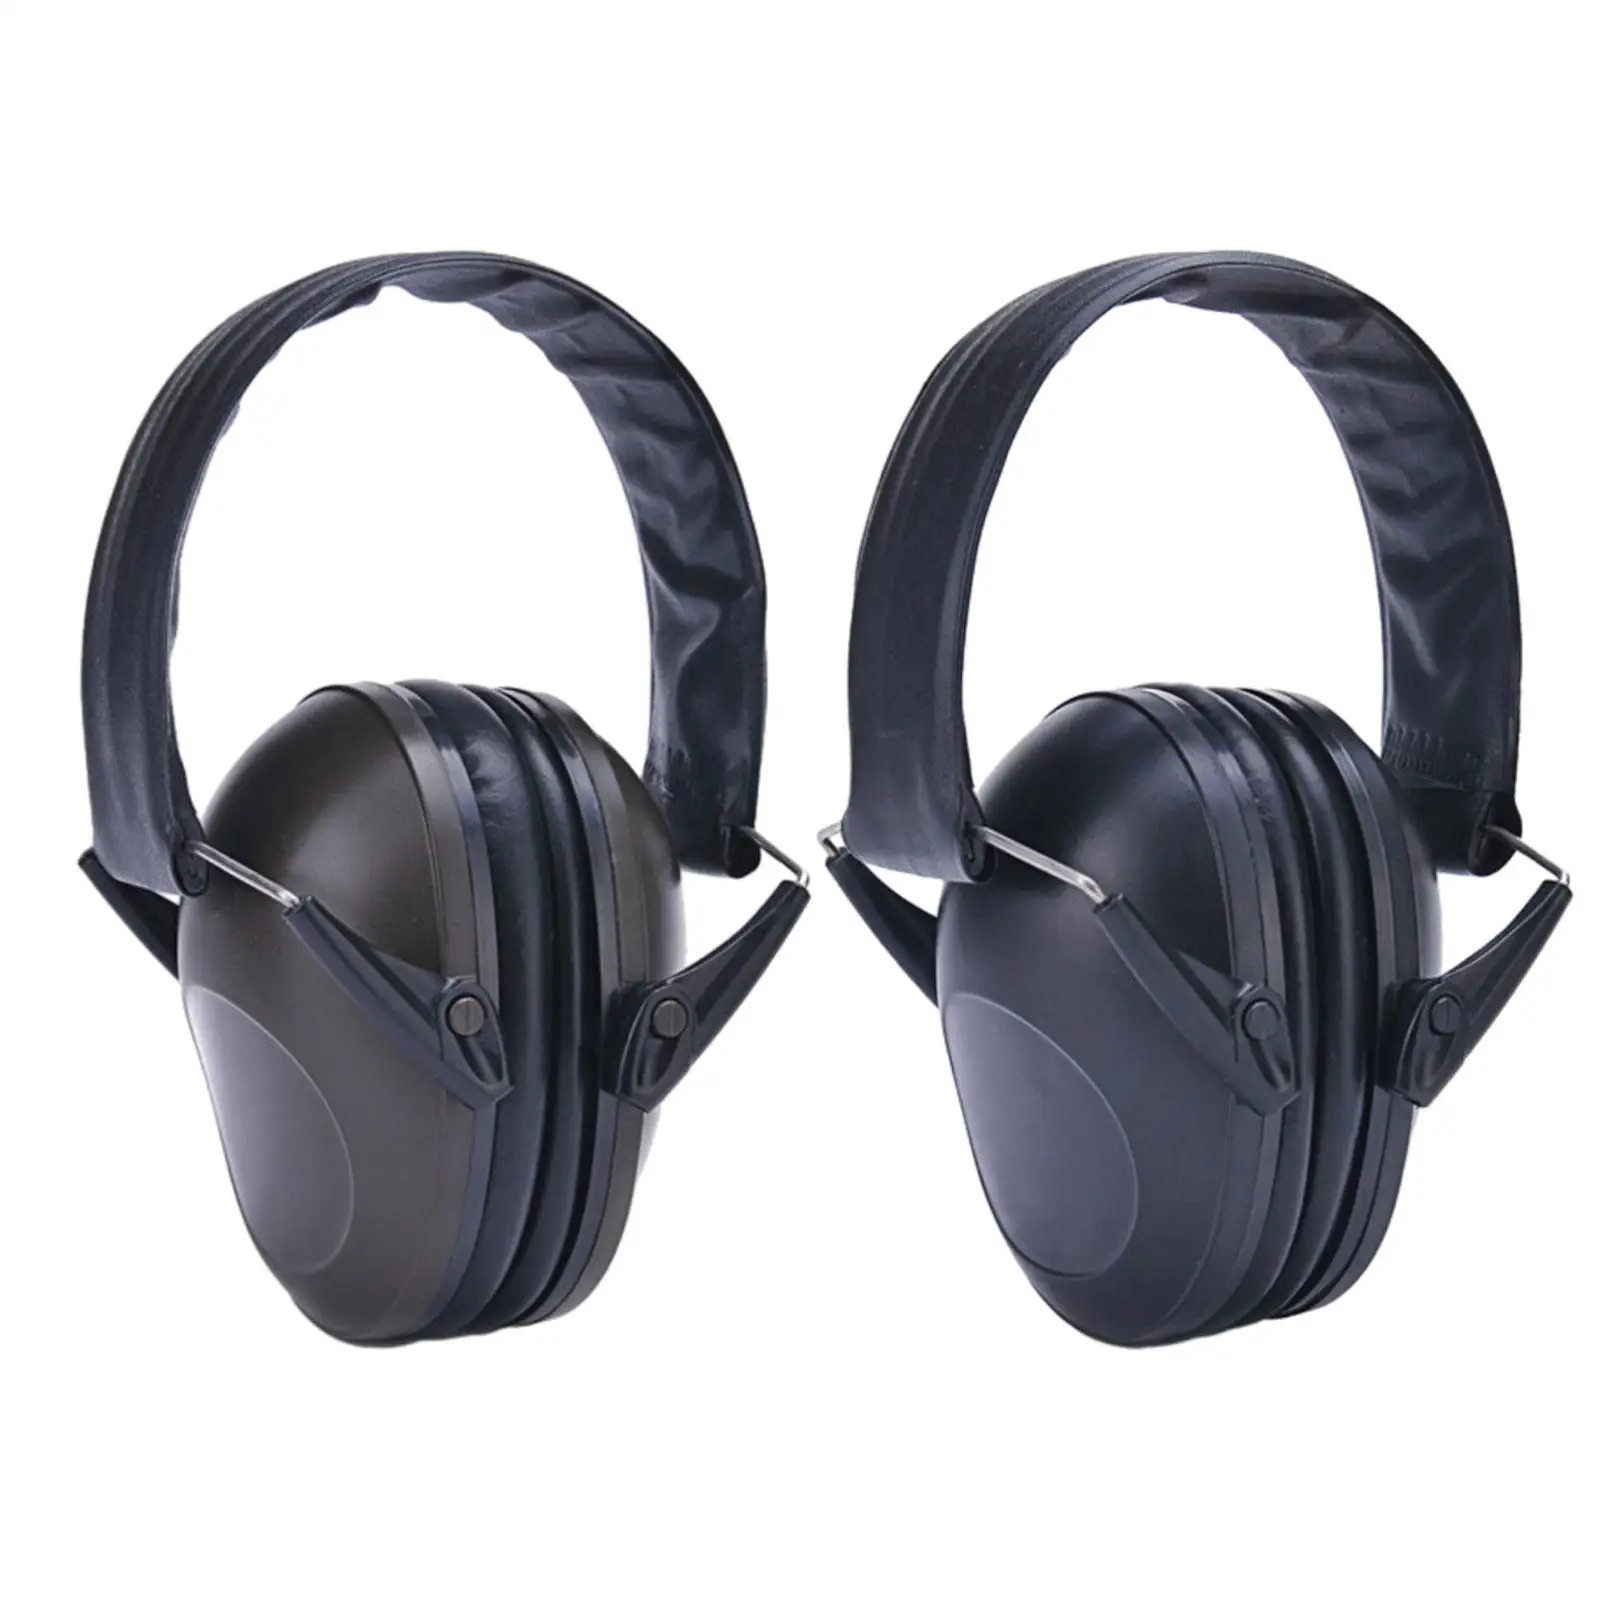 Ear Muff Noise Reducing Compact Soundproof Earmuffs Ear Protection Ear Cups for Business Wood Work Studying Lawn Mowing Gaming